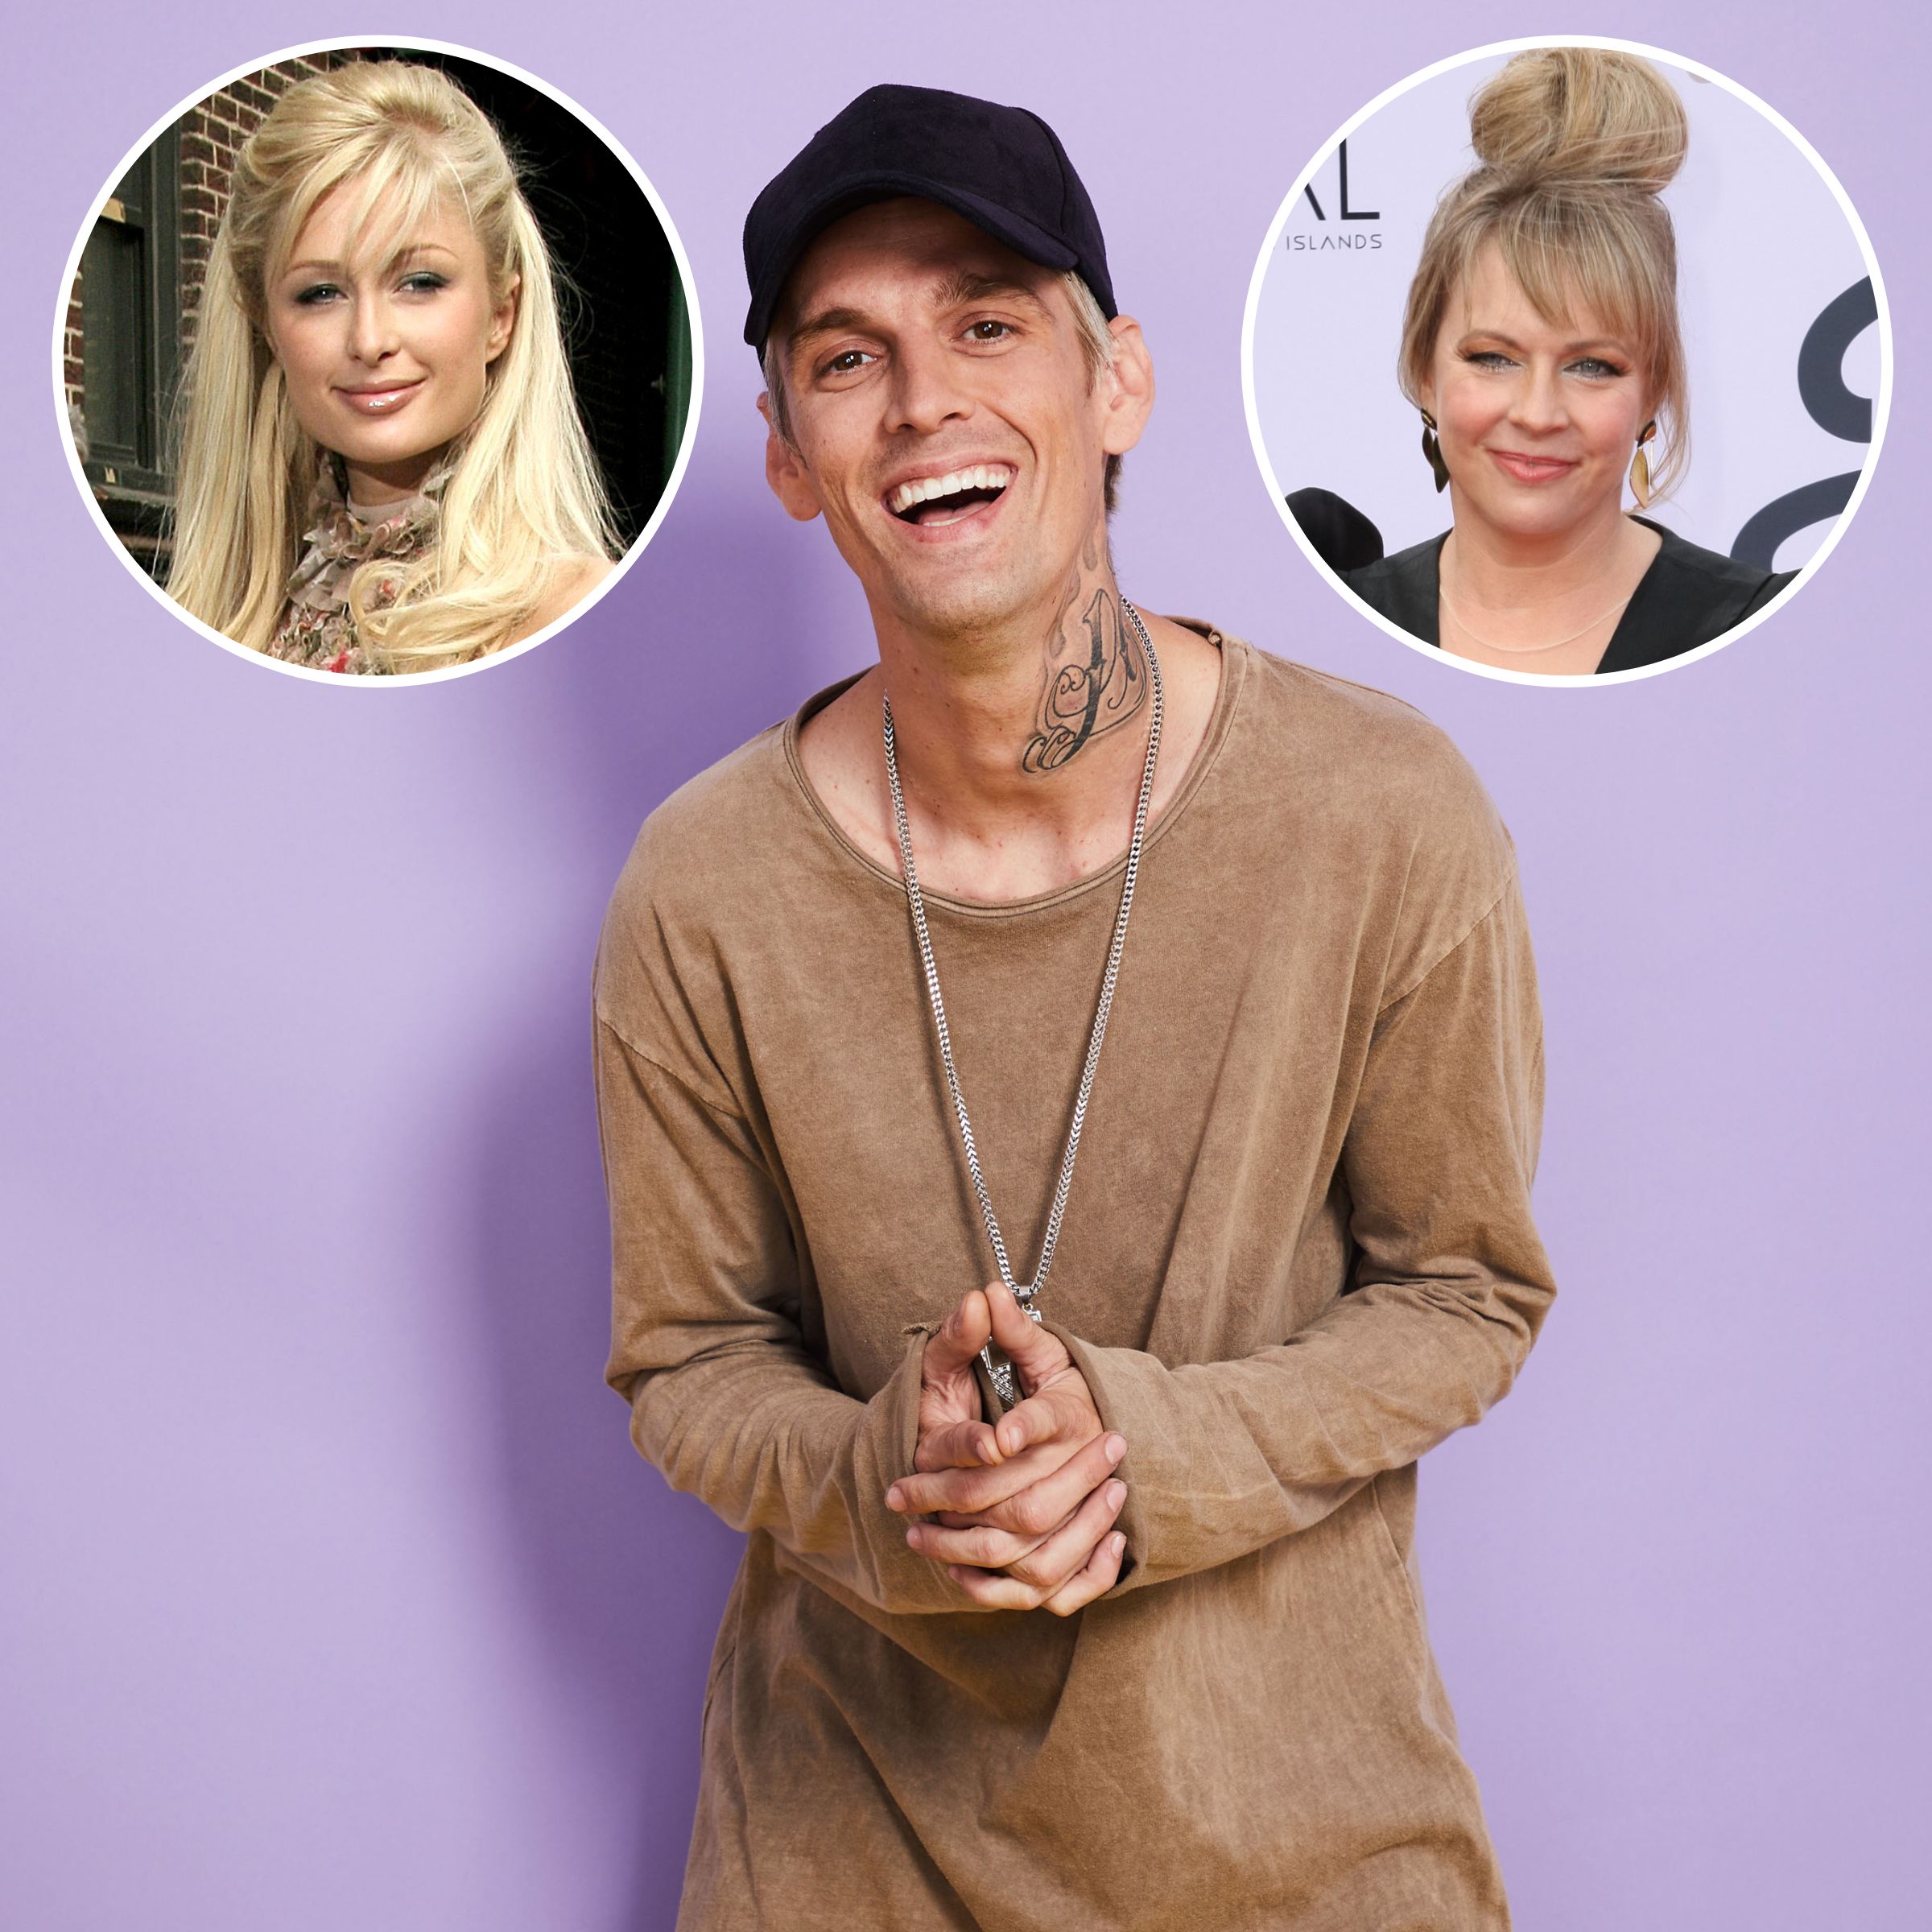 Celebrities' Tributes to Aaron Carter After Death: Statements